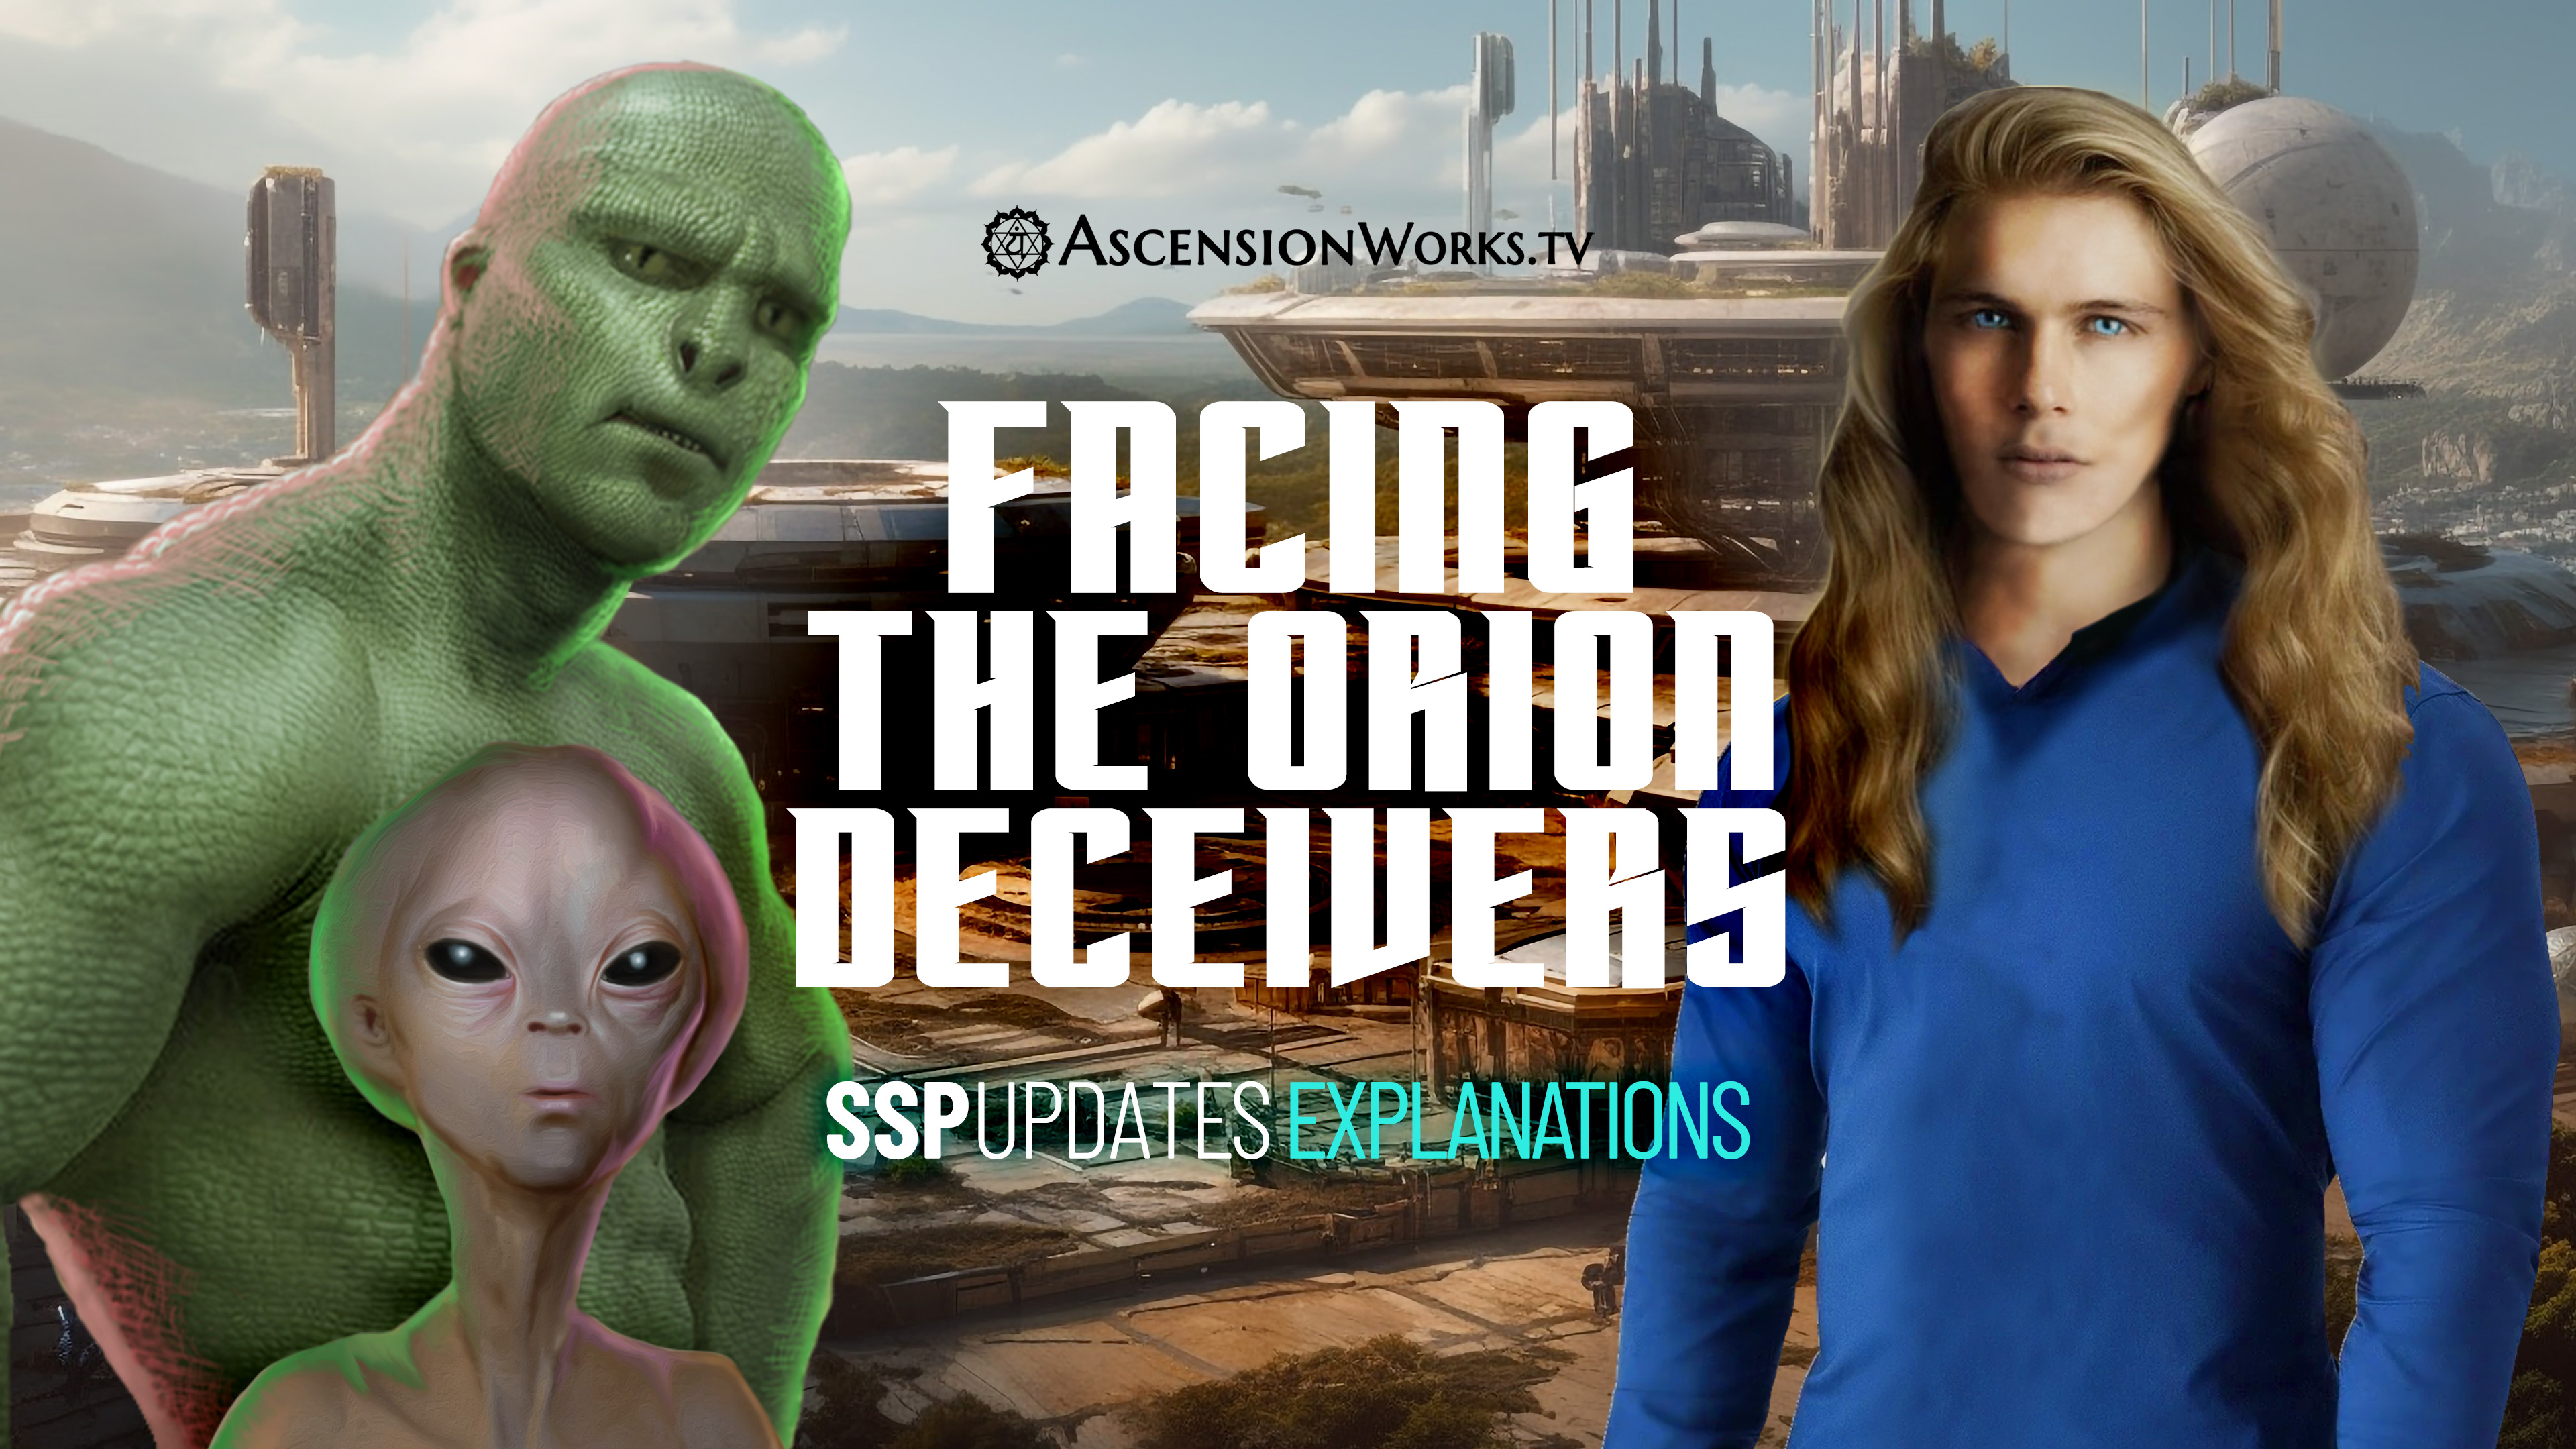 SSP Update Explanations Season 2 Episode 3: Facing The Orion Deceivers